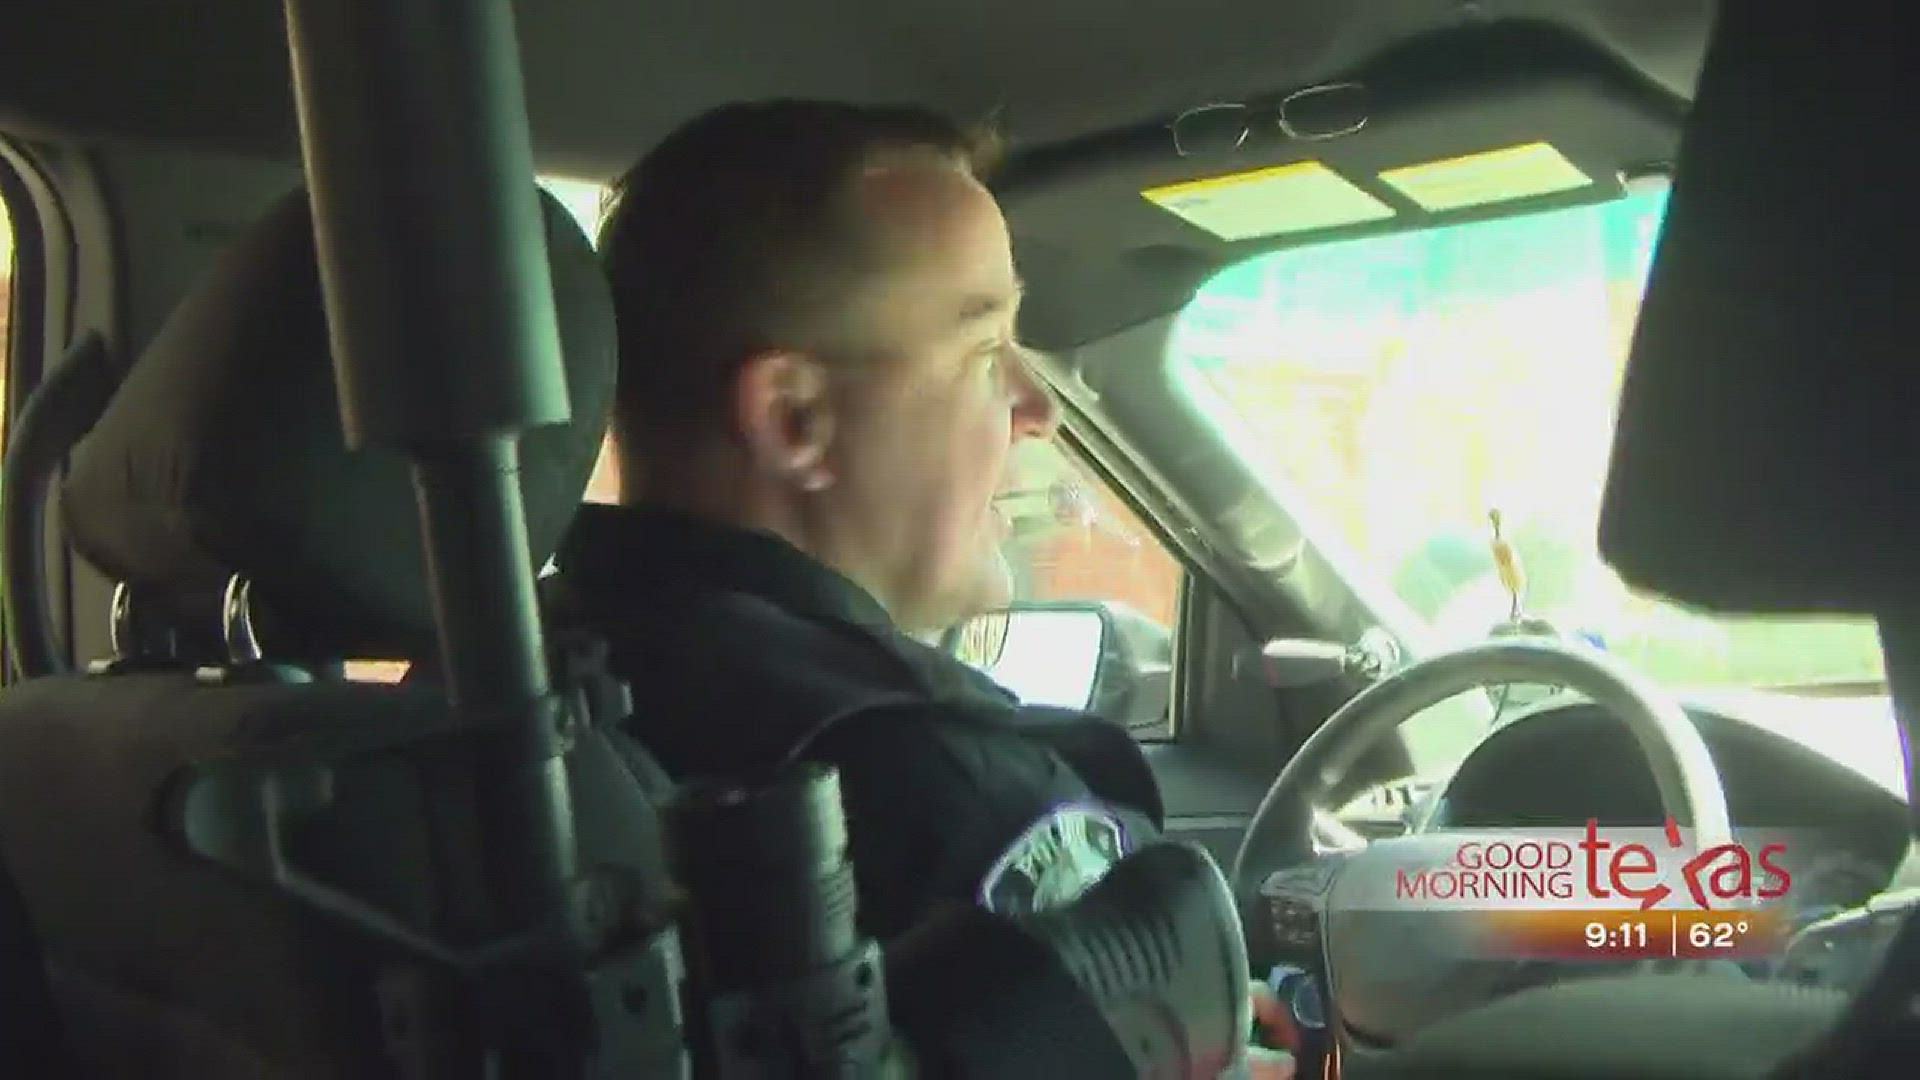 We take a ride-along with Tarleton State University police officer Scott Daily, who happens to be deaf.